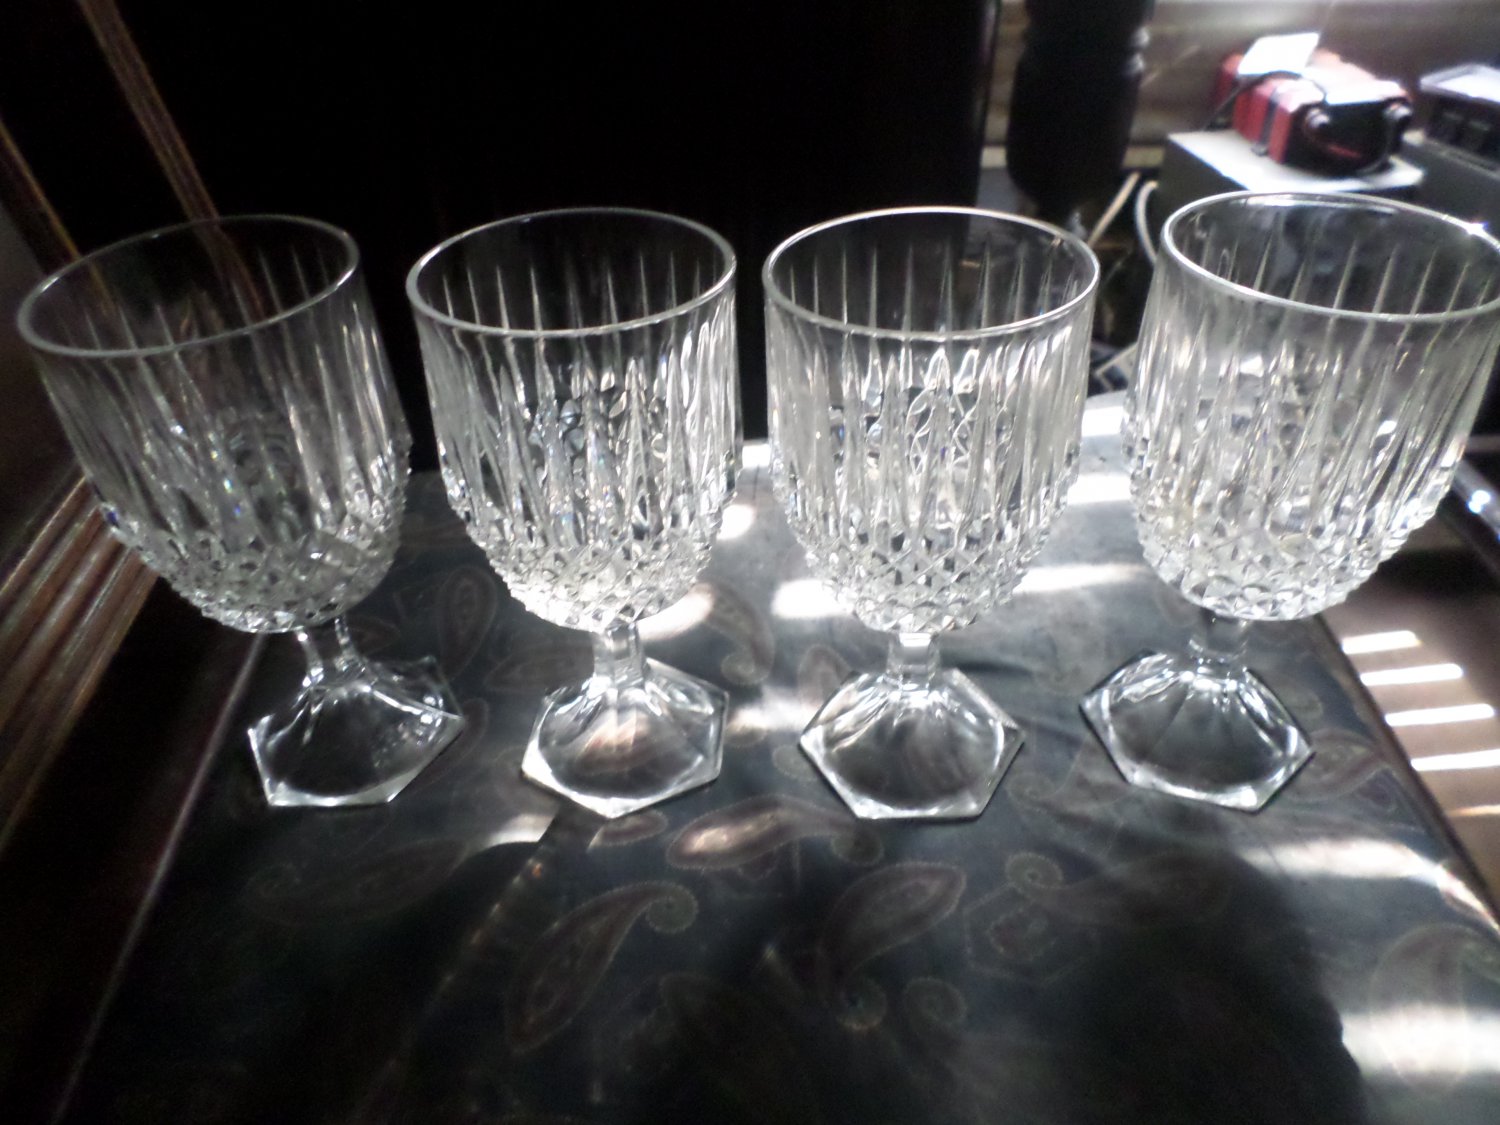 Set of 4 heavy Lead Crystal cut Wine Glasses clear like new condition